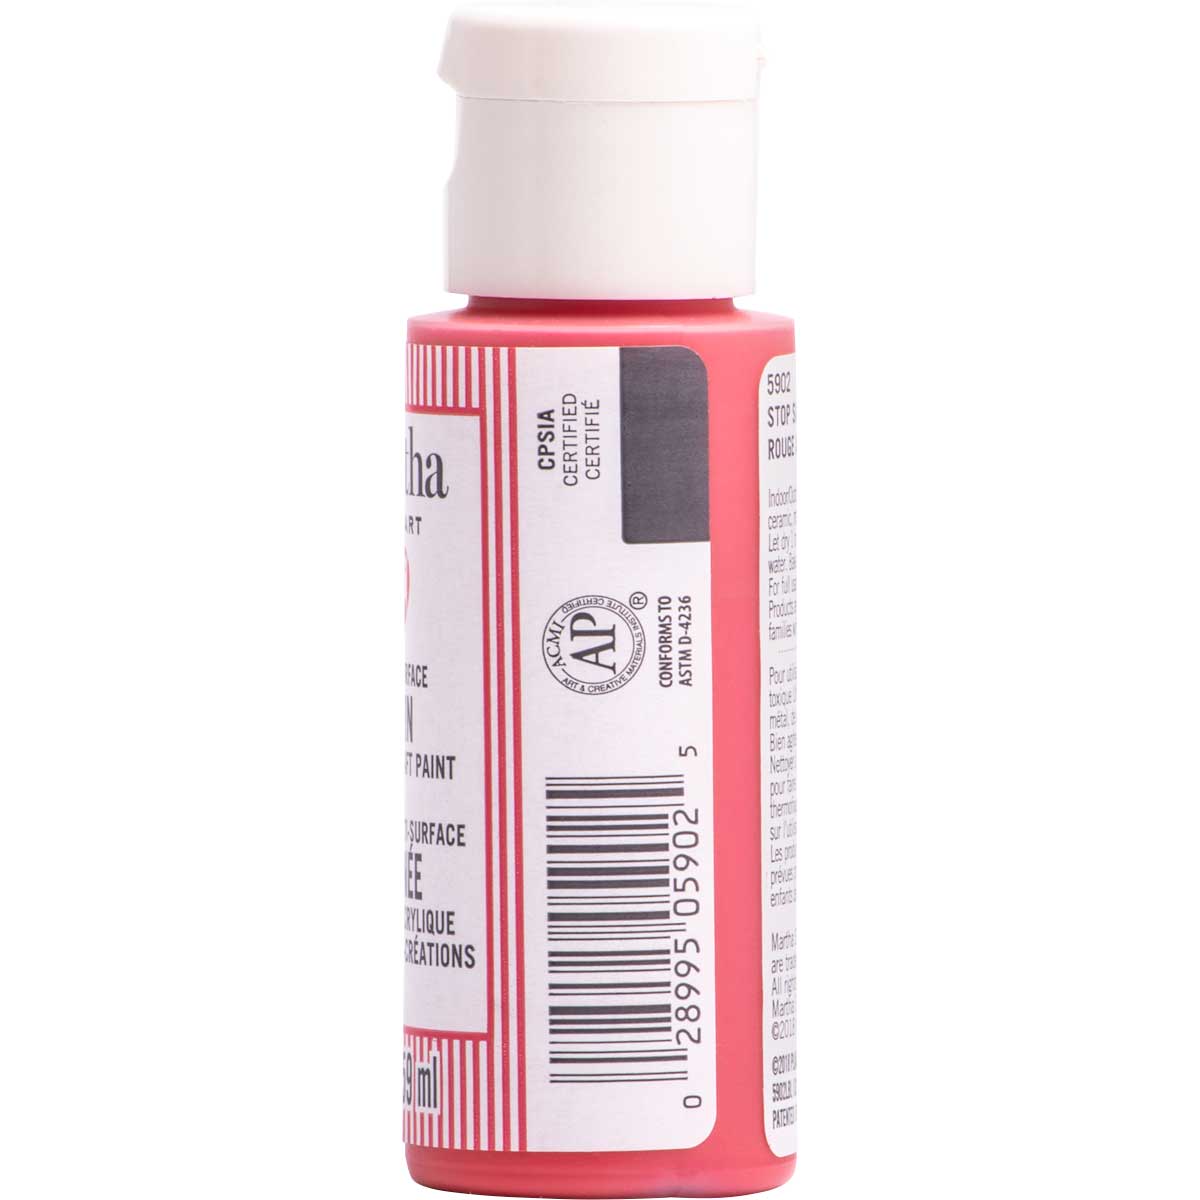 Martha Stewart ® Multi-Surface Satin Acrylic Craft Paint CPSIA - Stop Sign Red, 2 oz. - 5902